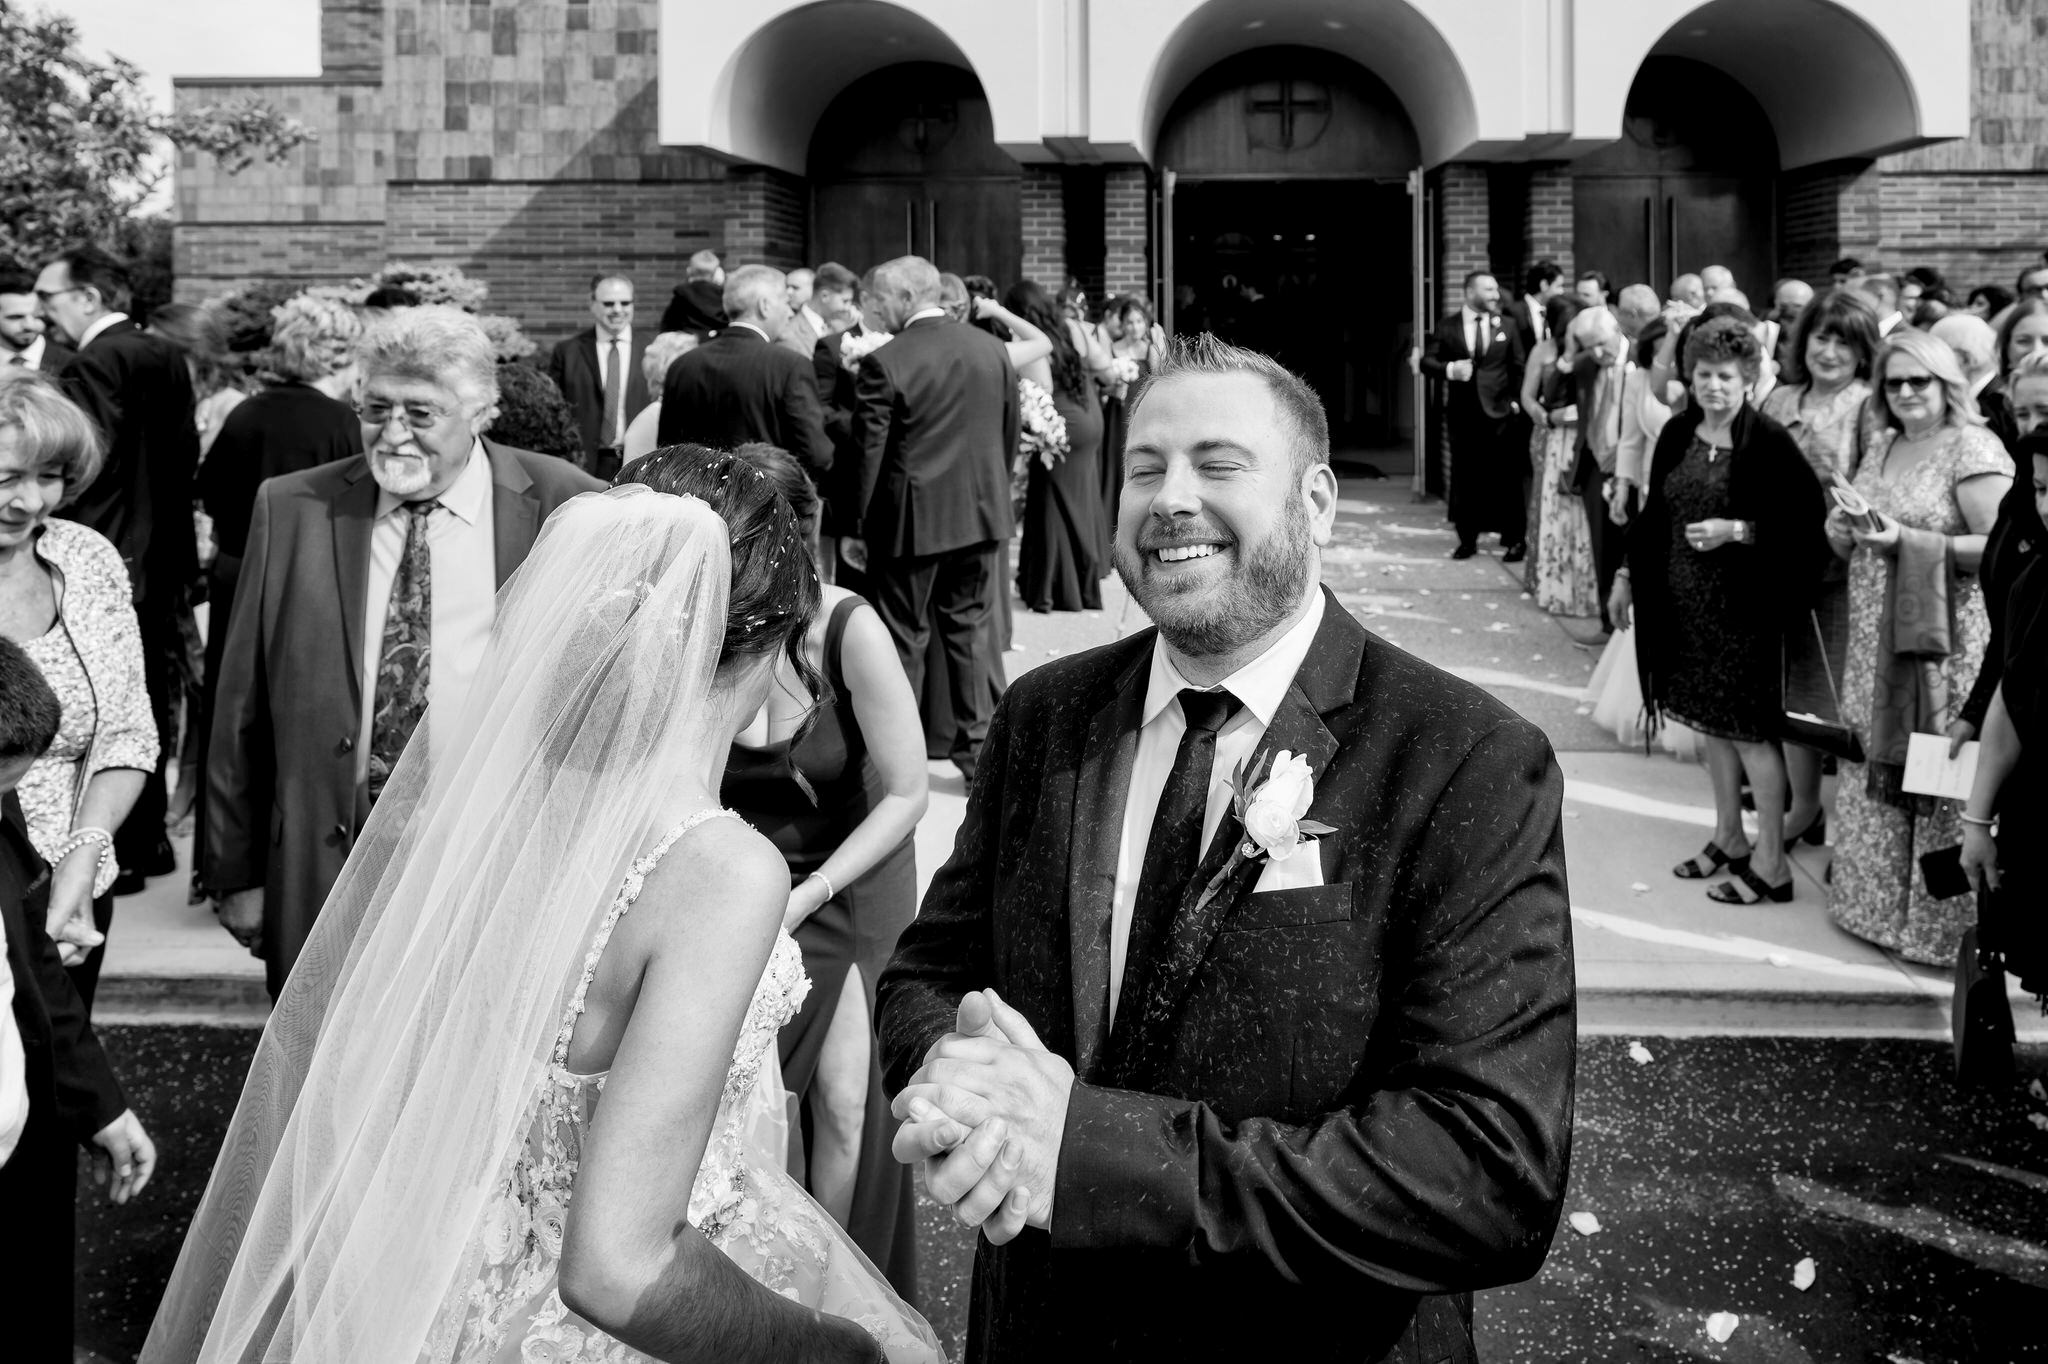 A groom smiles after rice is thrown on him during the ceremony exit from his Assumption Greek Orthodox wedding in St. Clair Shores, Michigan. 